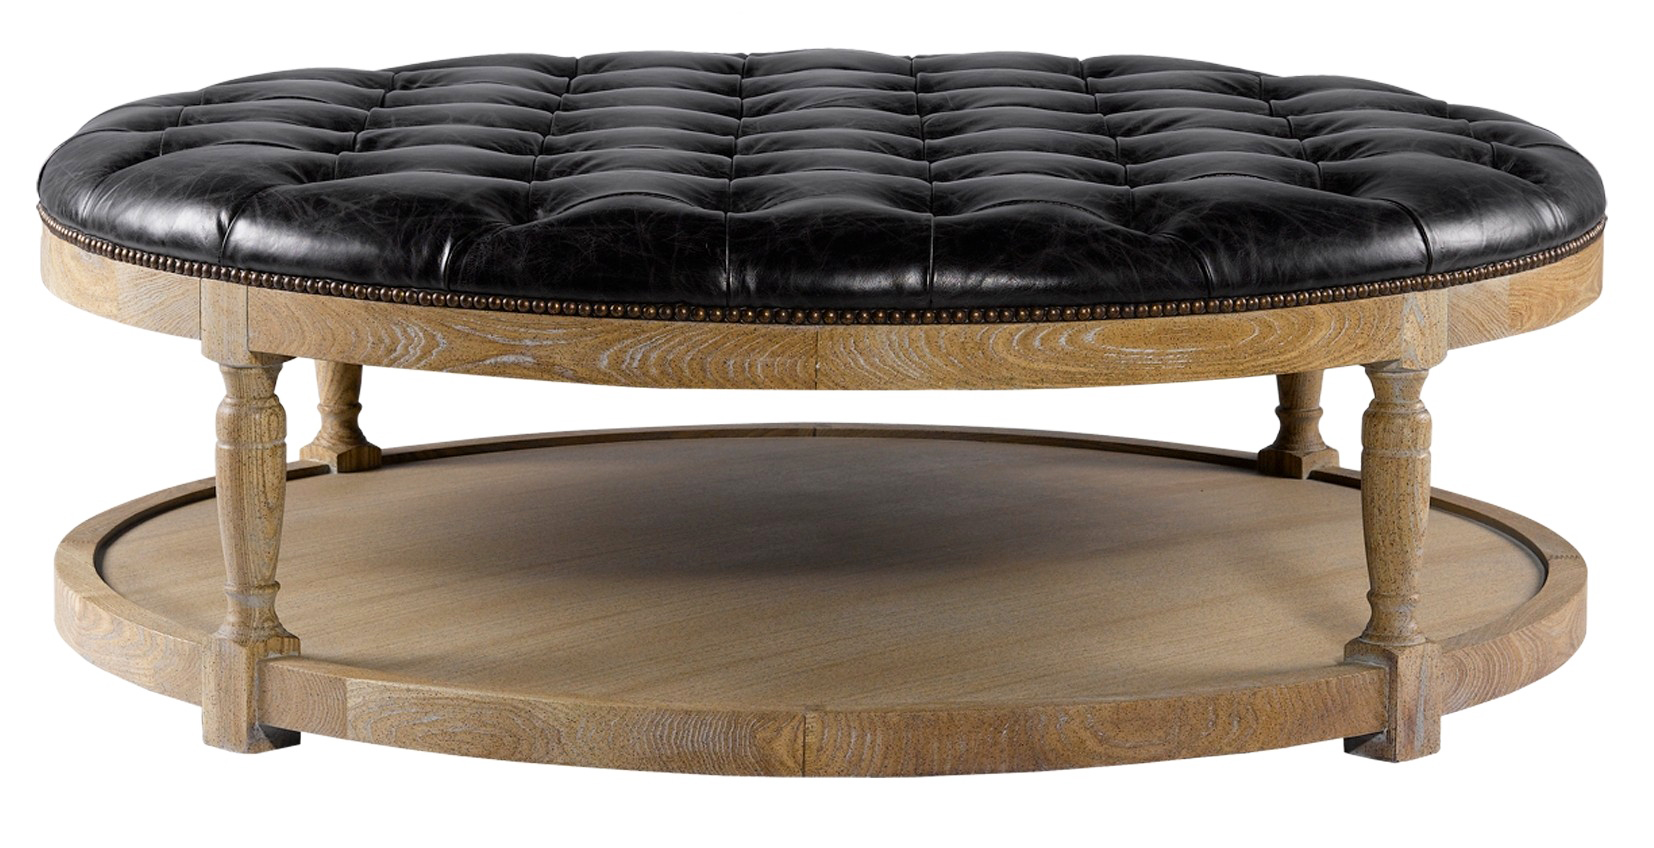 leather-furniture-and-wood-coffee-table-in-luxury-living-room-furniture-sets-ideas